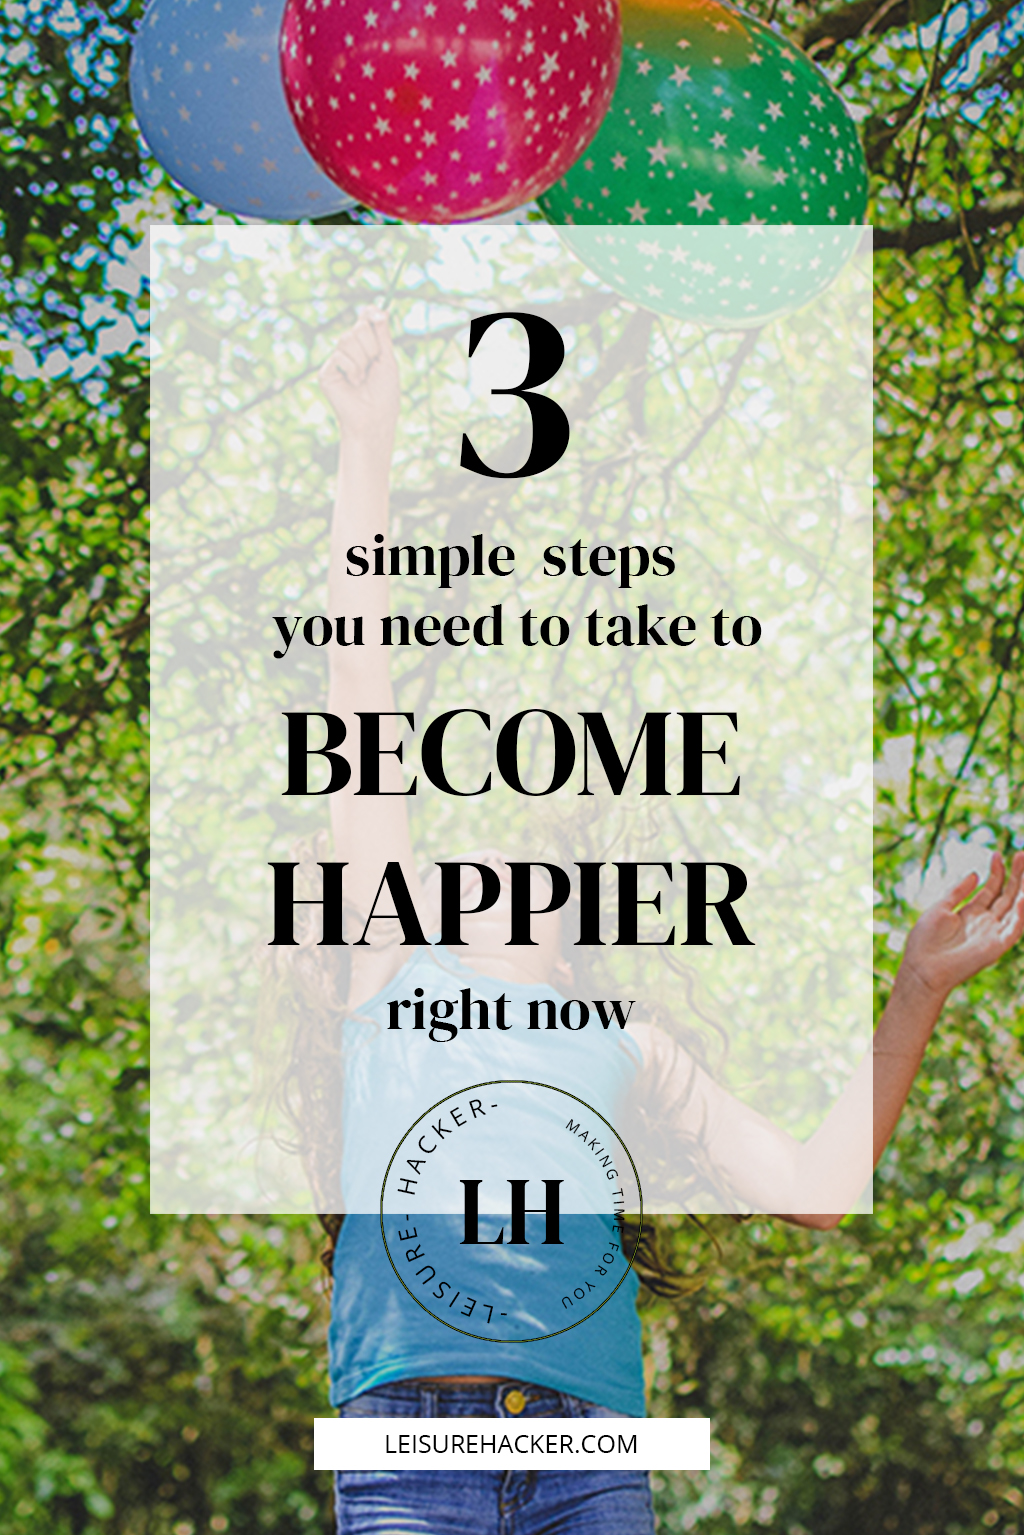 Discover the 3 simple steps you need to take to become happier right now